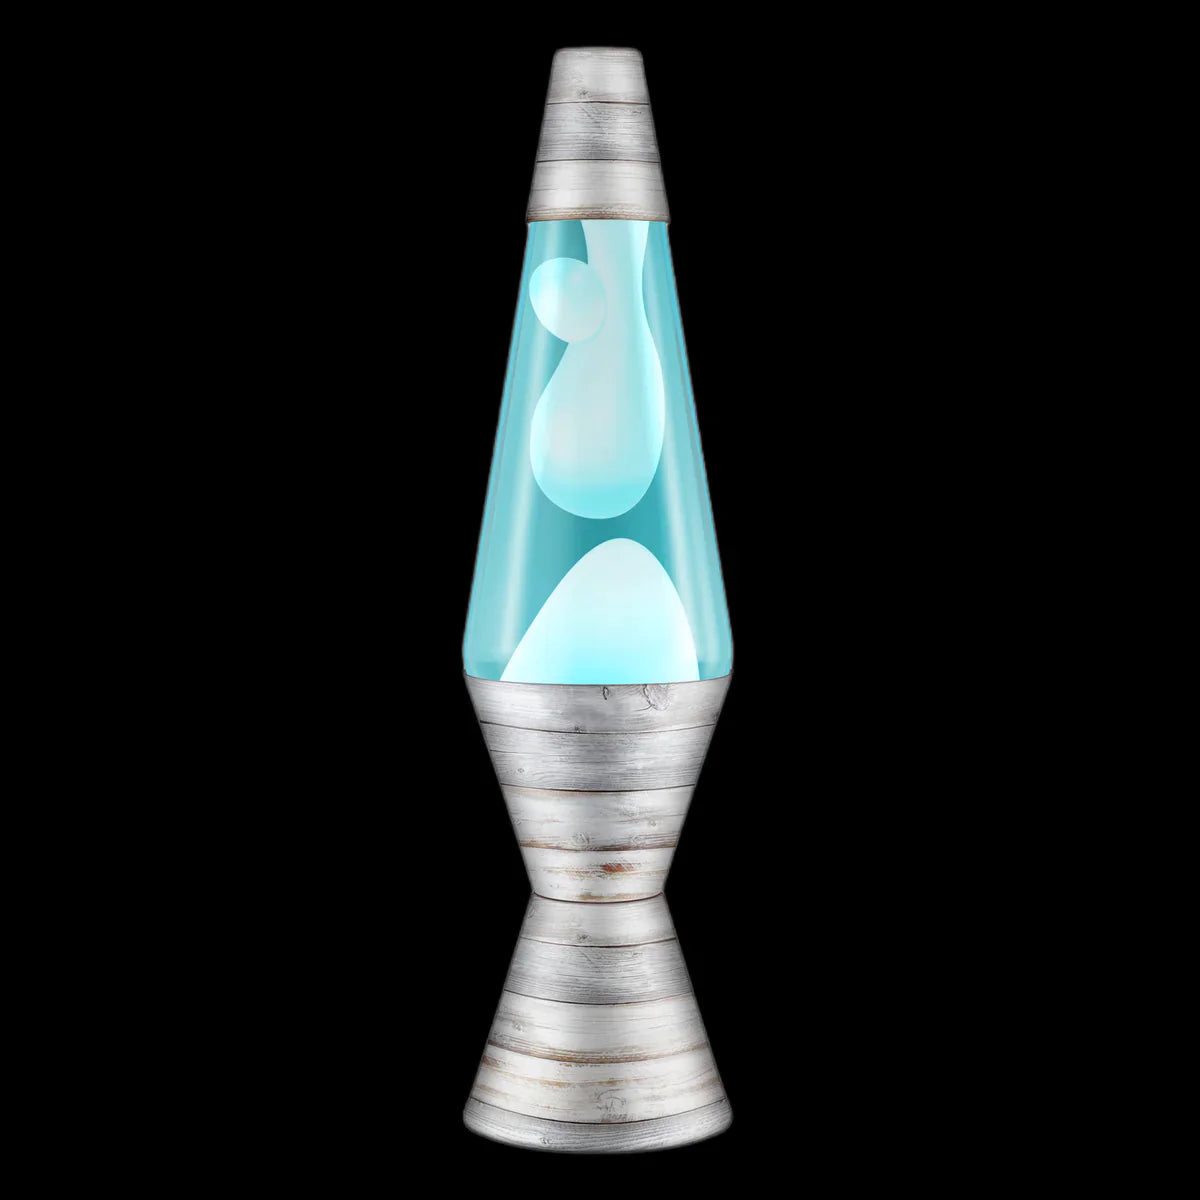 Lava Lamp - Reclaimed Wood White and Teal